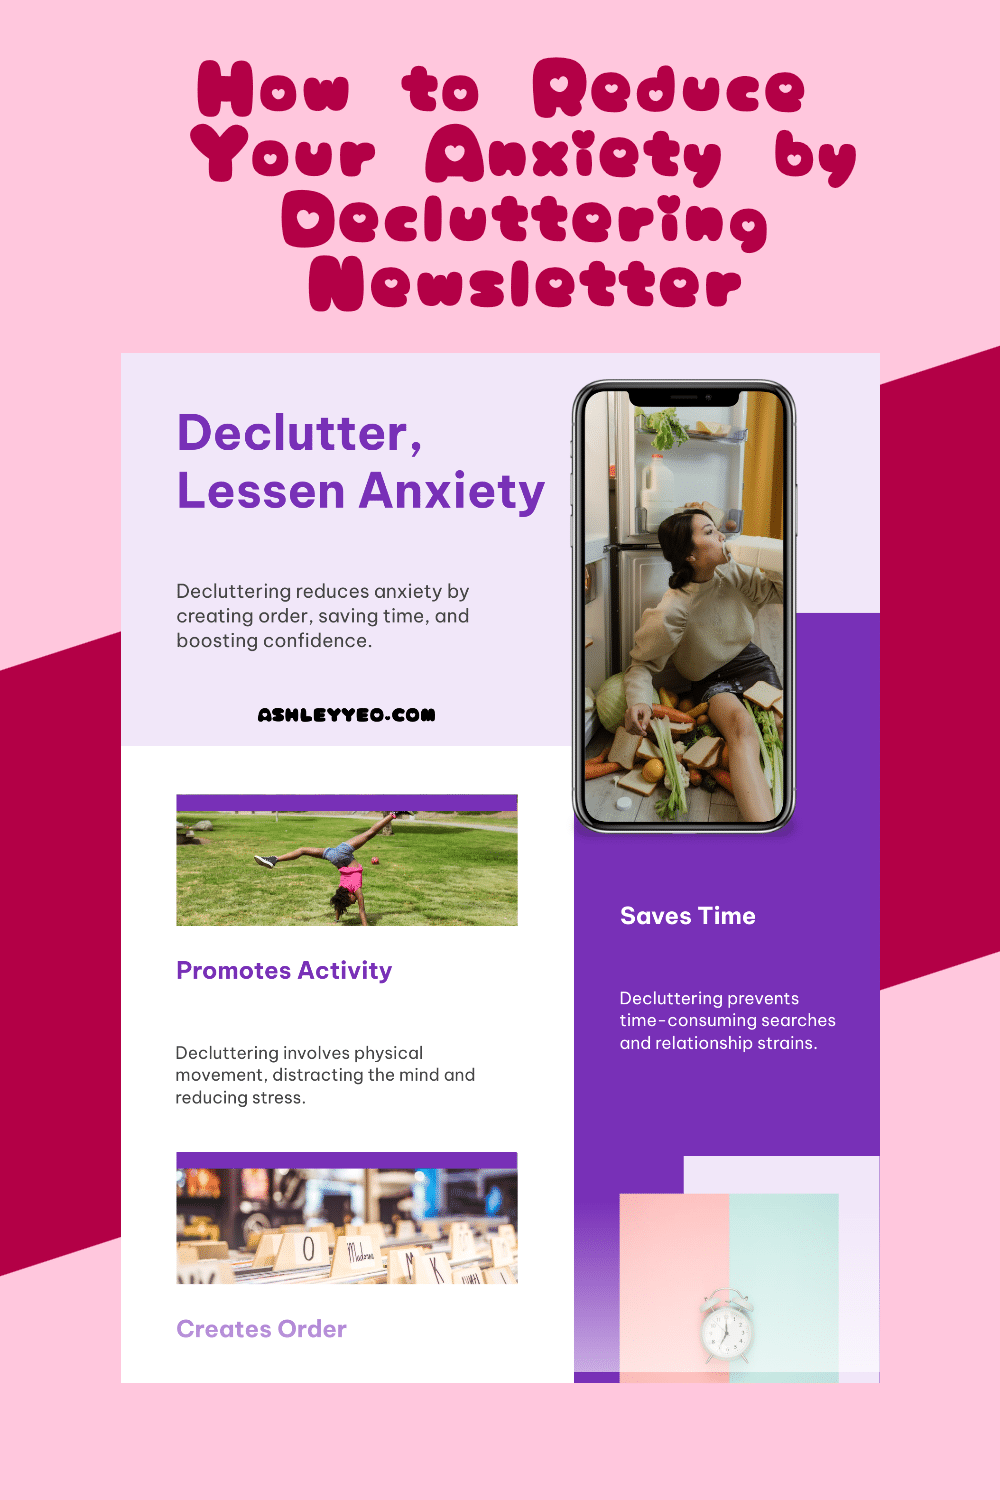 How to Reduce Your Anxiety by Decluttering Newsletter